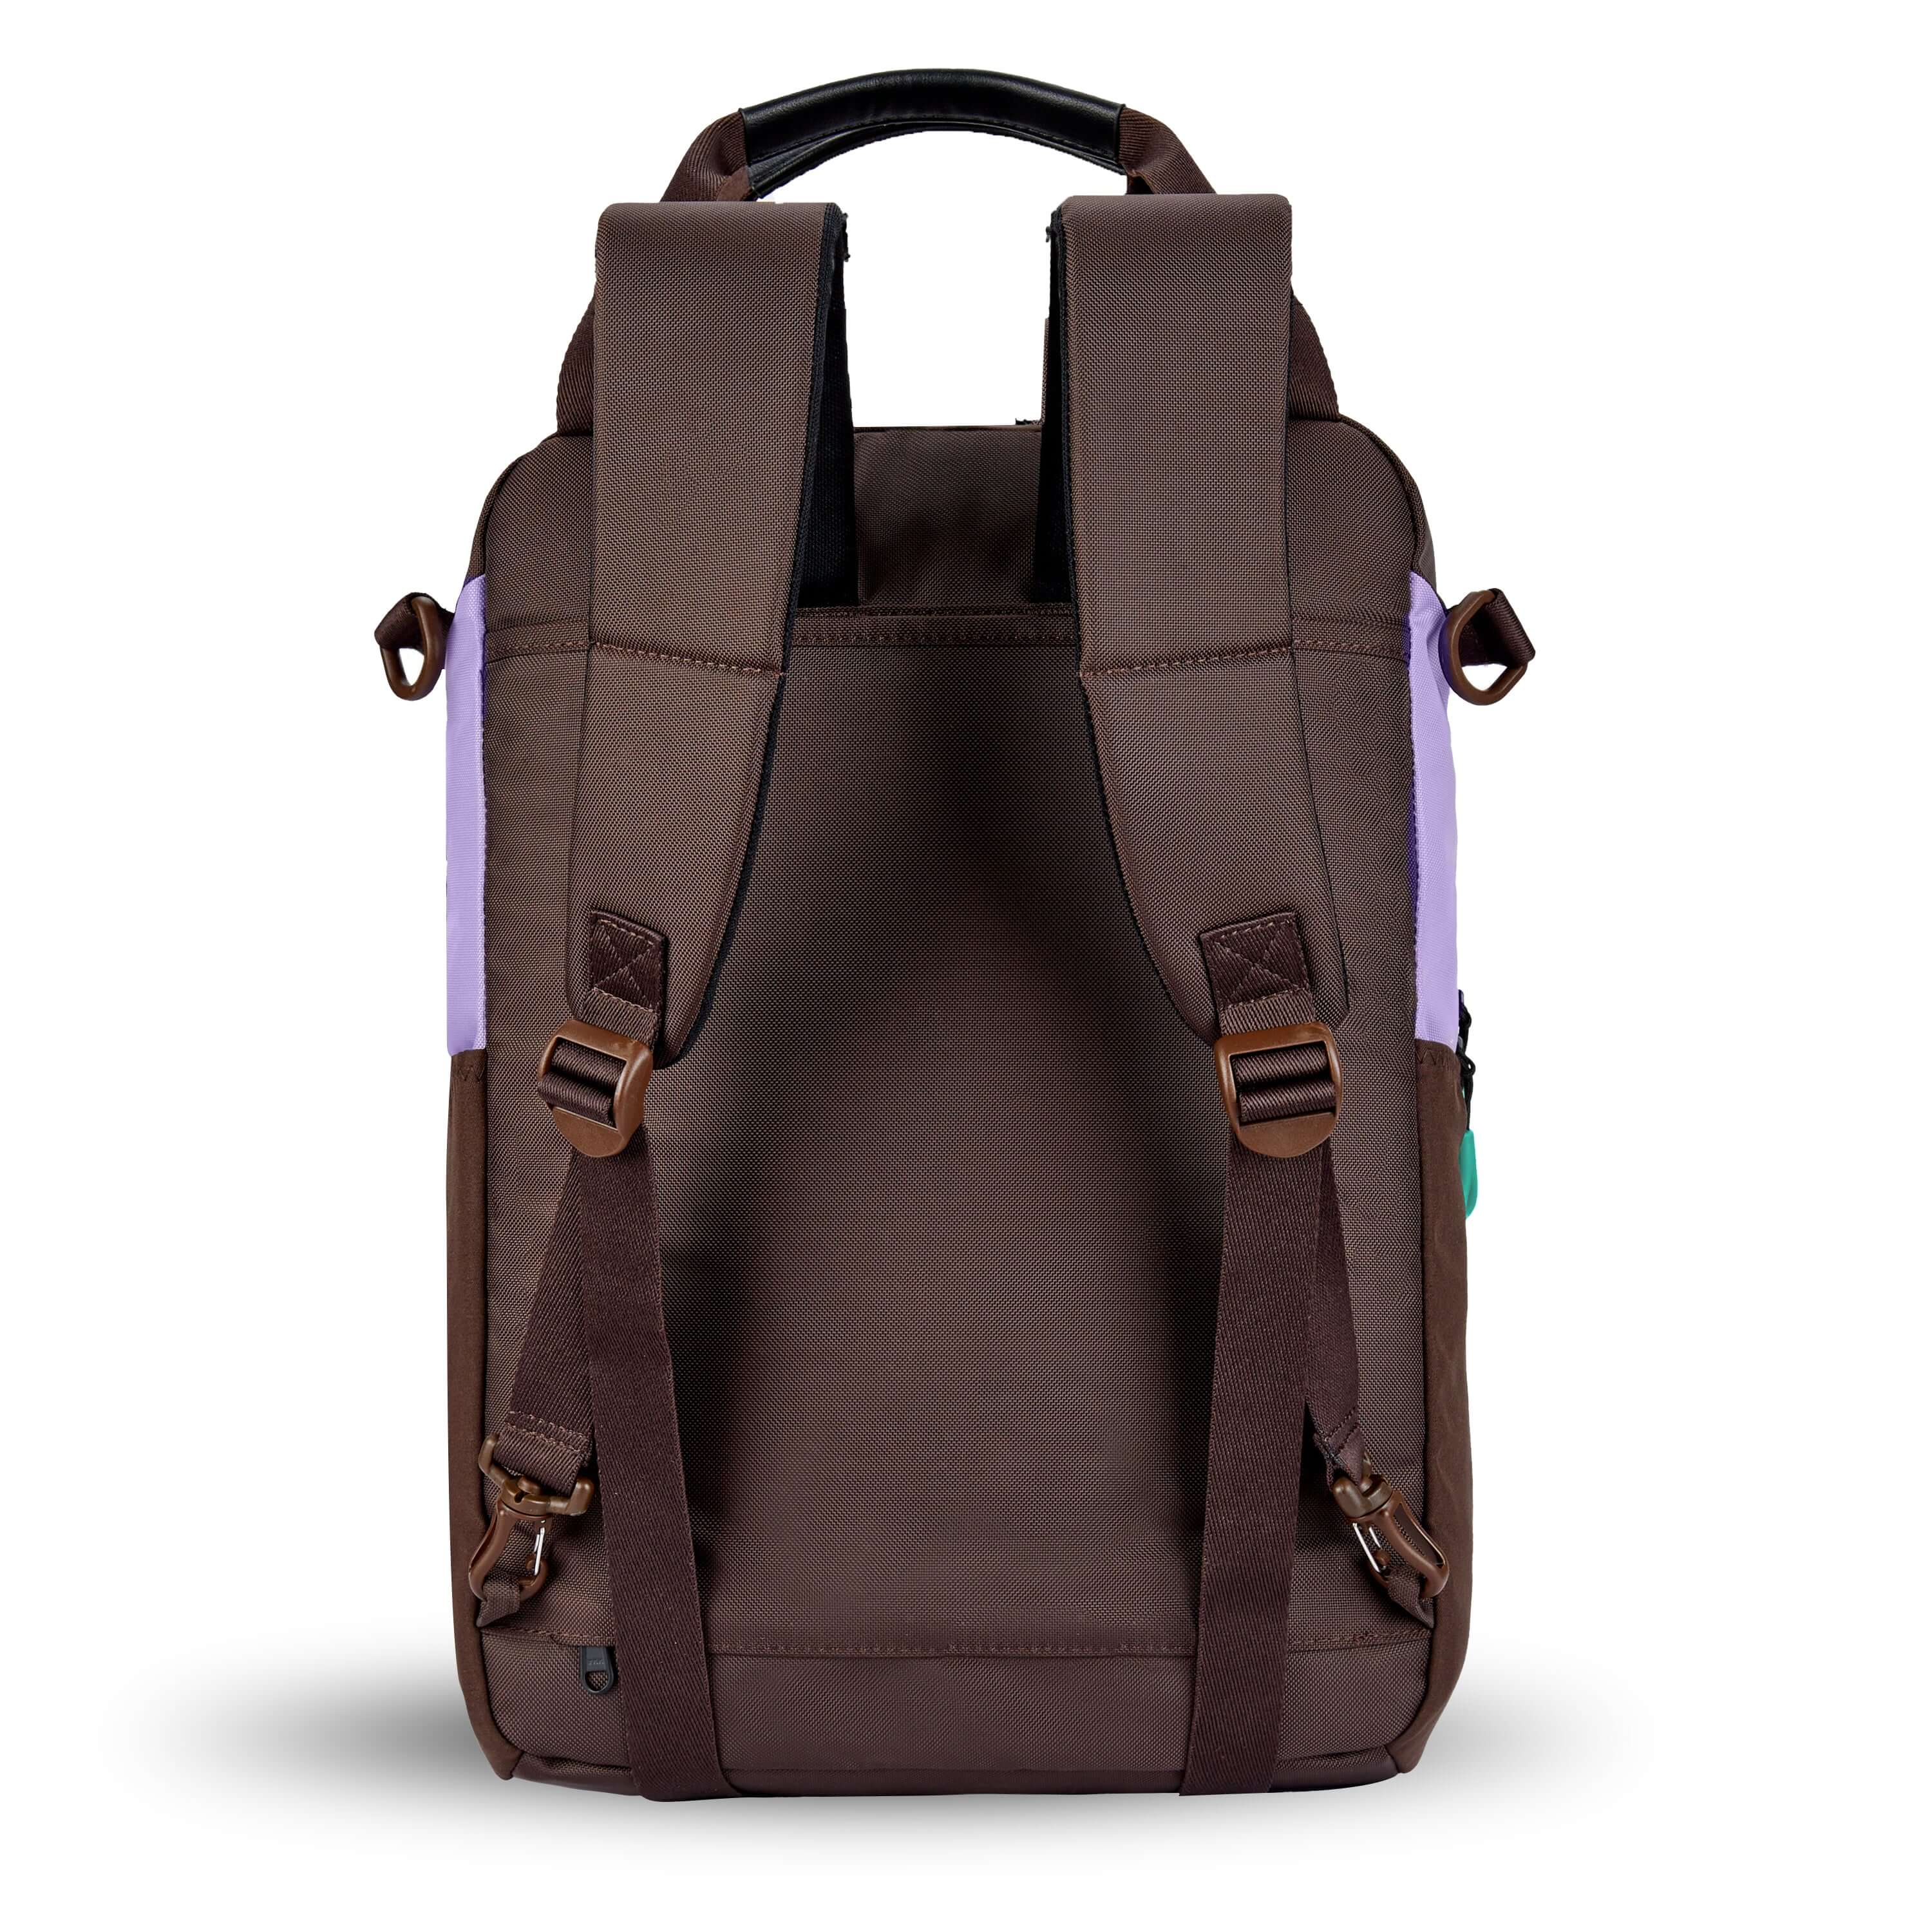 Back view of Sherpani's three-in-one bag, the Camden in Lavender. The back of the bag is entirely brown. An elastic water bottle holder sits on either side of the bag. The bag has padded/adjustable backpack straps and short tote handles fixed at the top. 